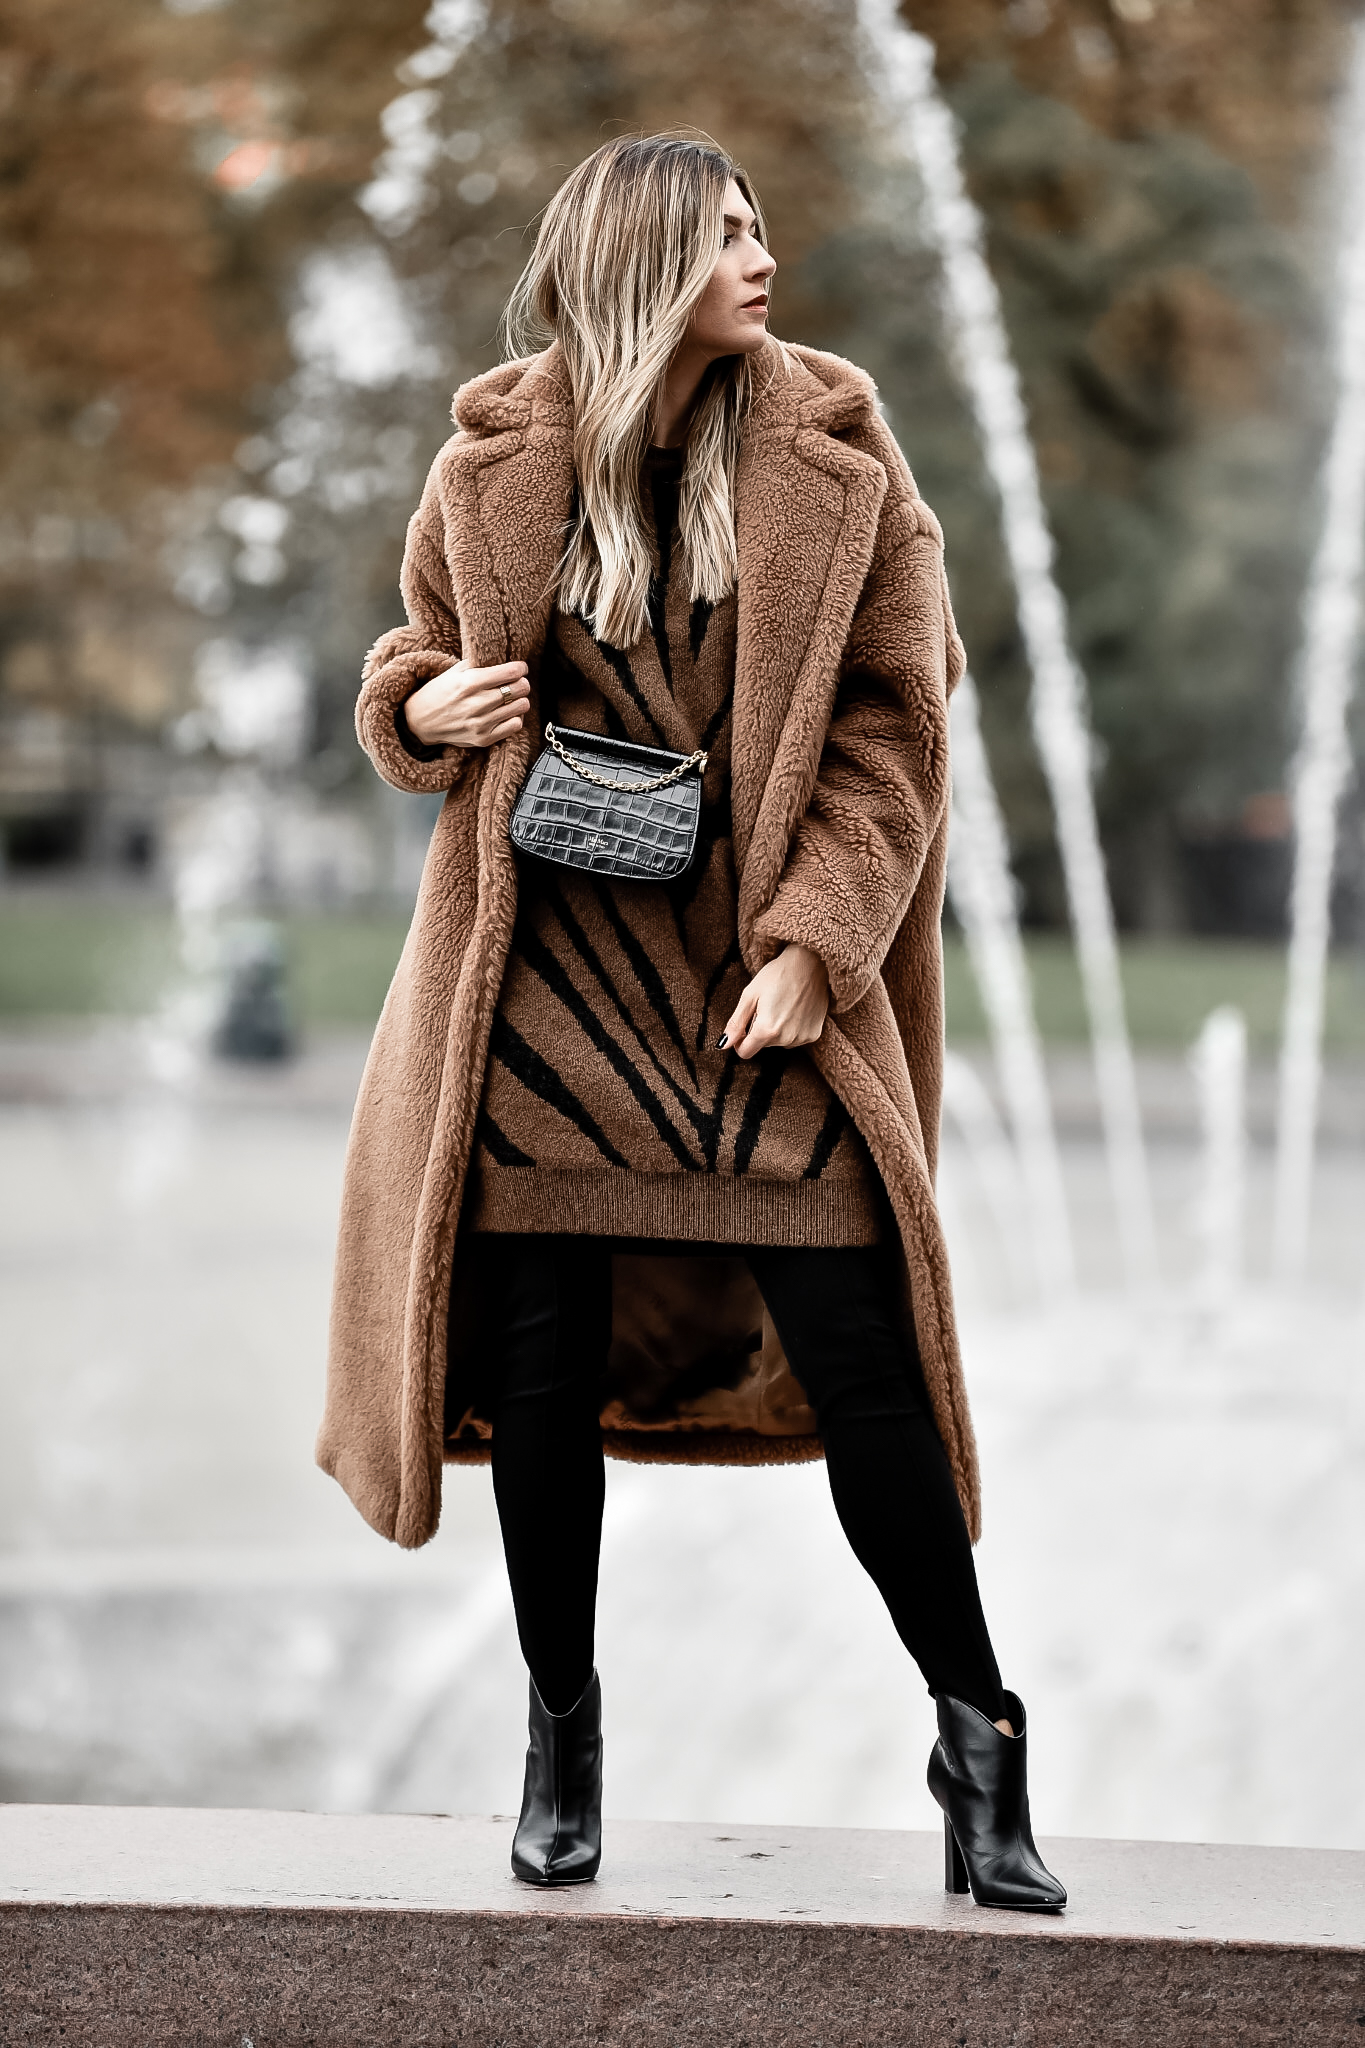 The Grey Edit - Cortney Bigelow - Stylelogue - Statement Fur - Max Mara Teddy Bear Icon Coat - Seattle Center - 1 Year Anniversary of the Series - Fountain